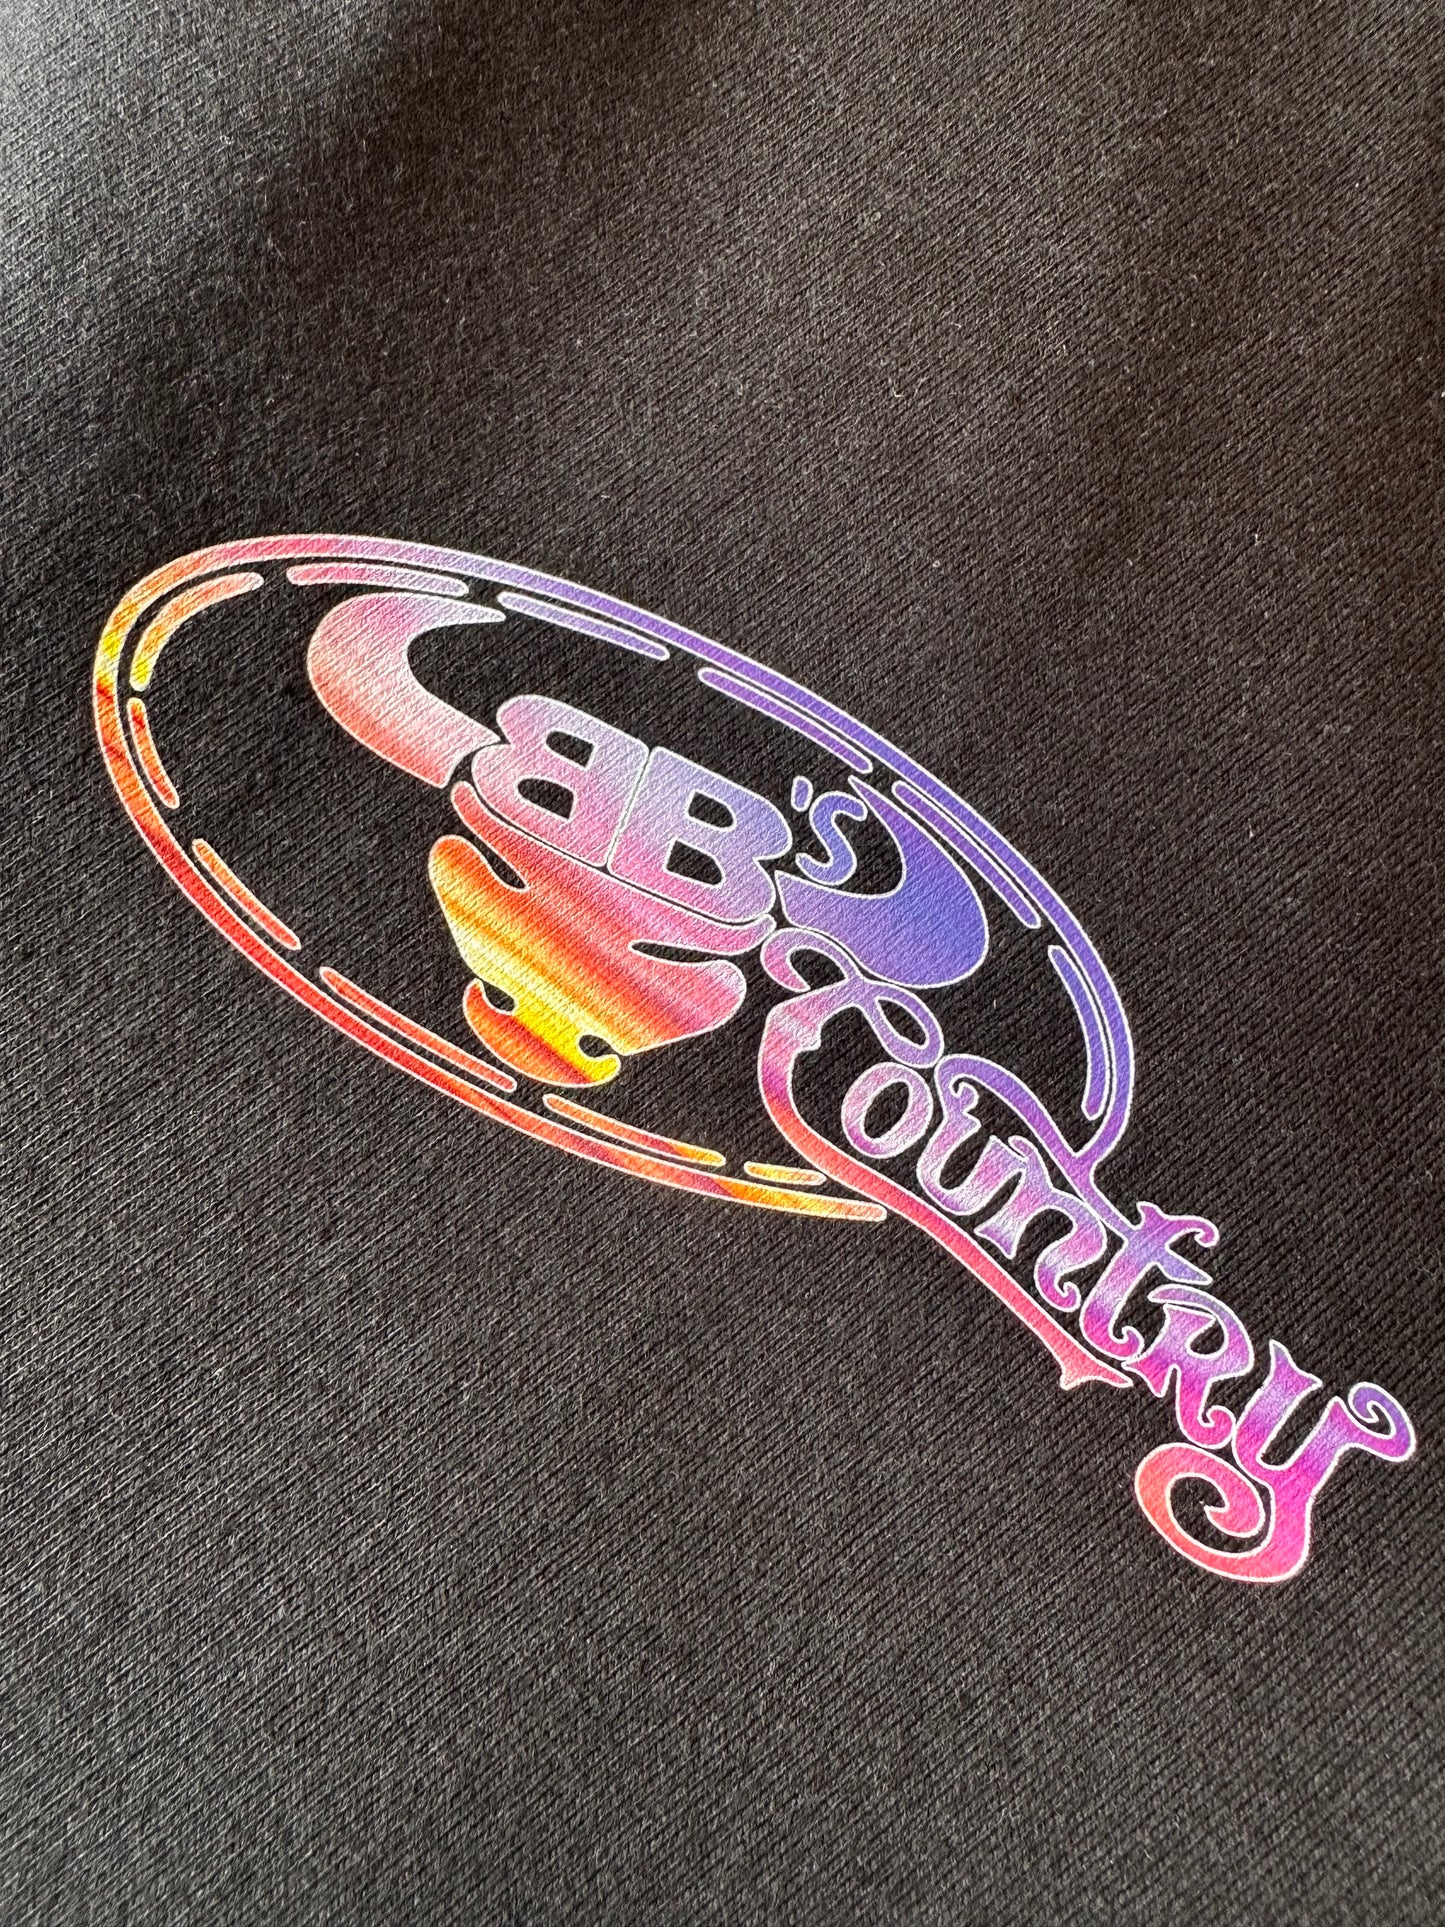 BB’s Country Signature - Tee W/Sunset Logo